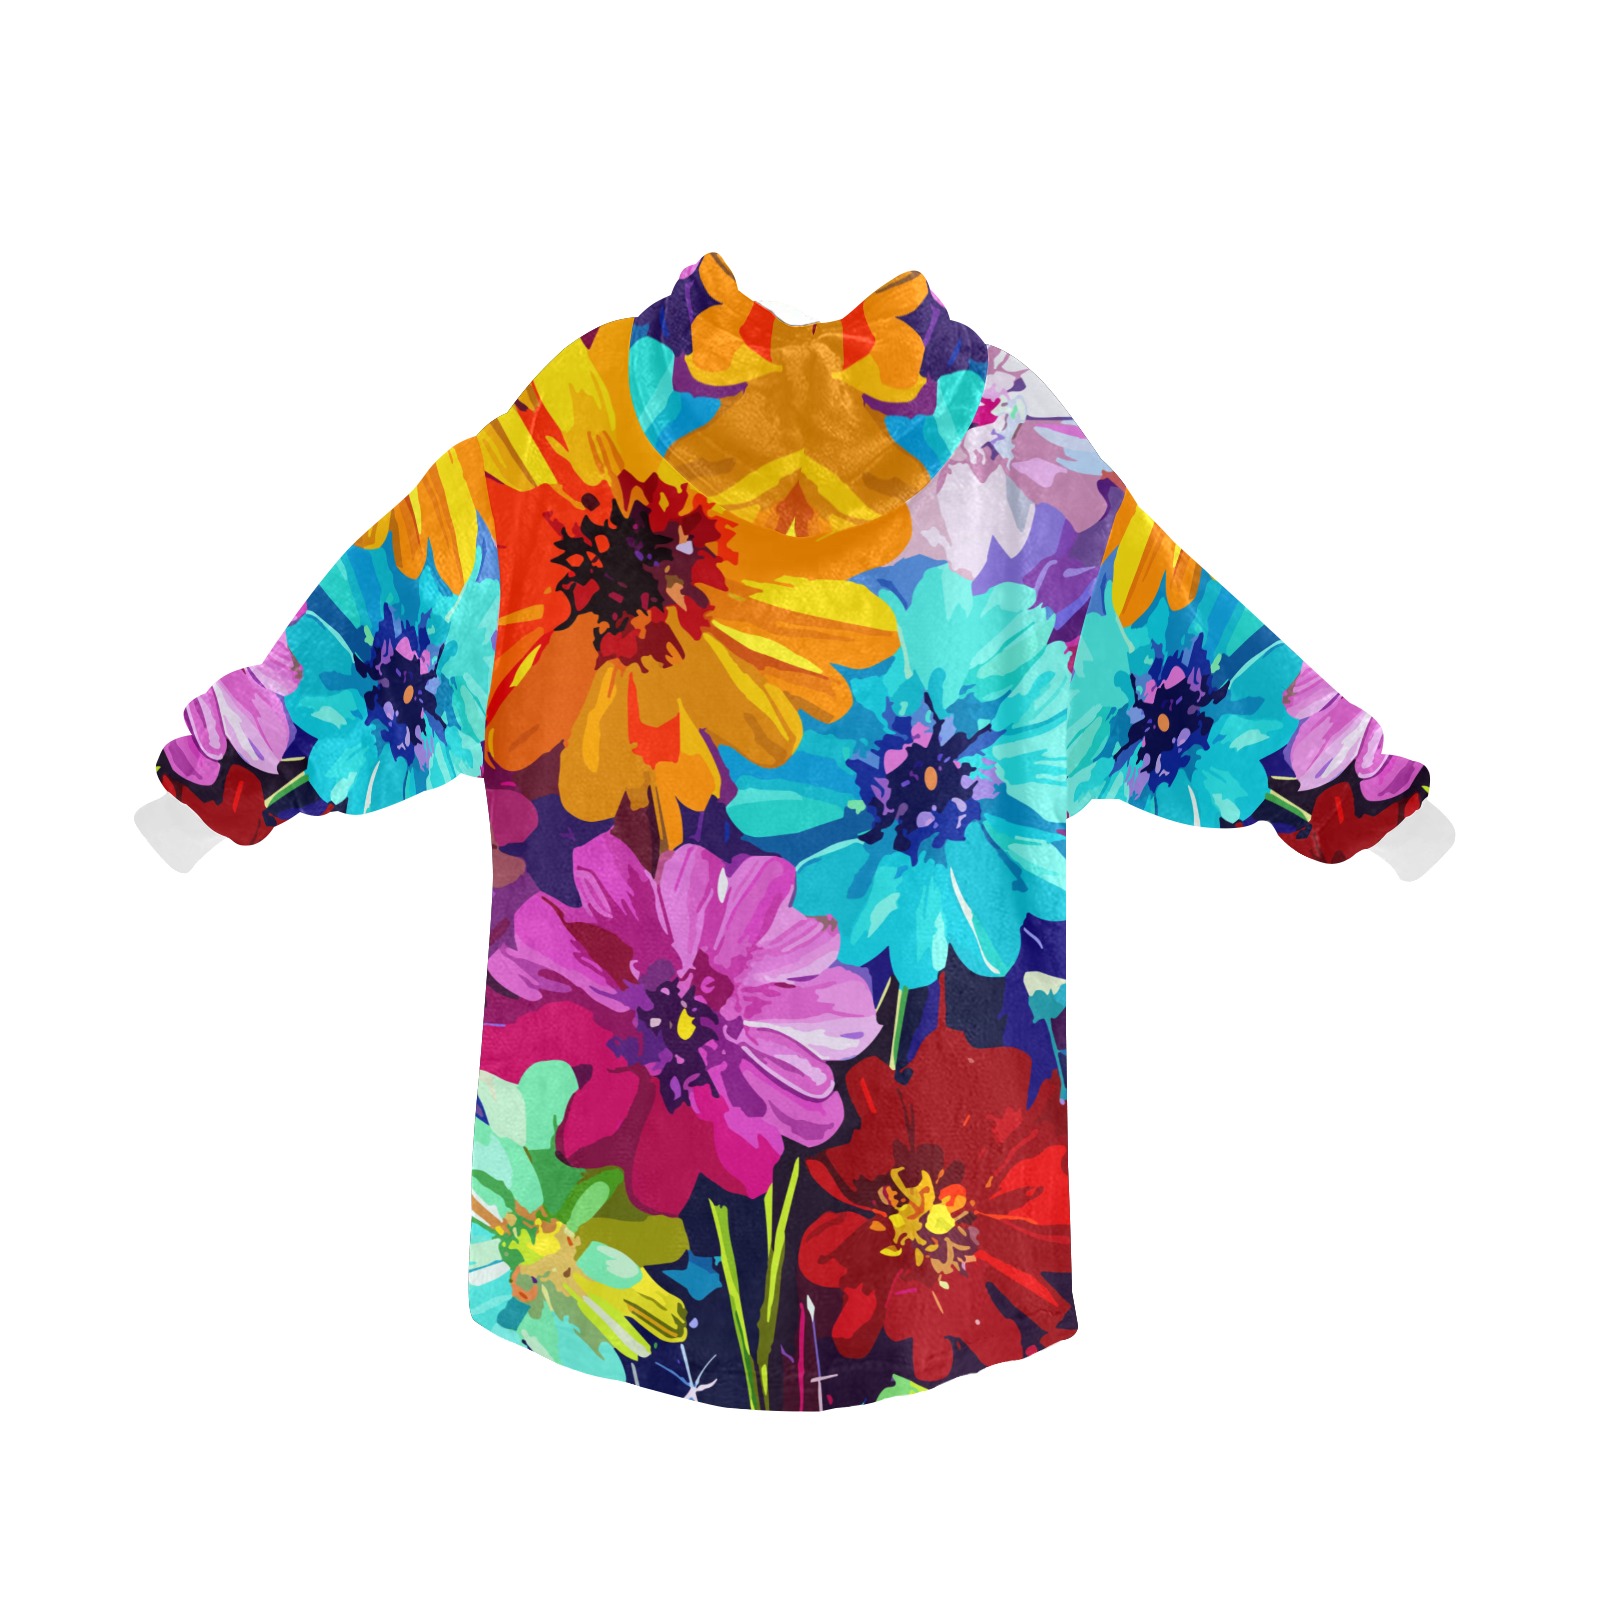 Bunch of colorful fantasy flowers positive art Blanket Hoodie for Women